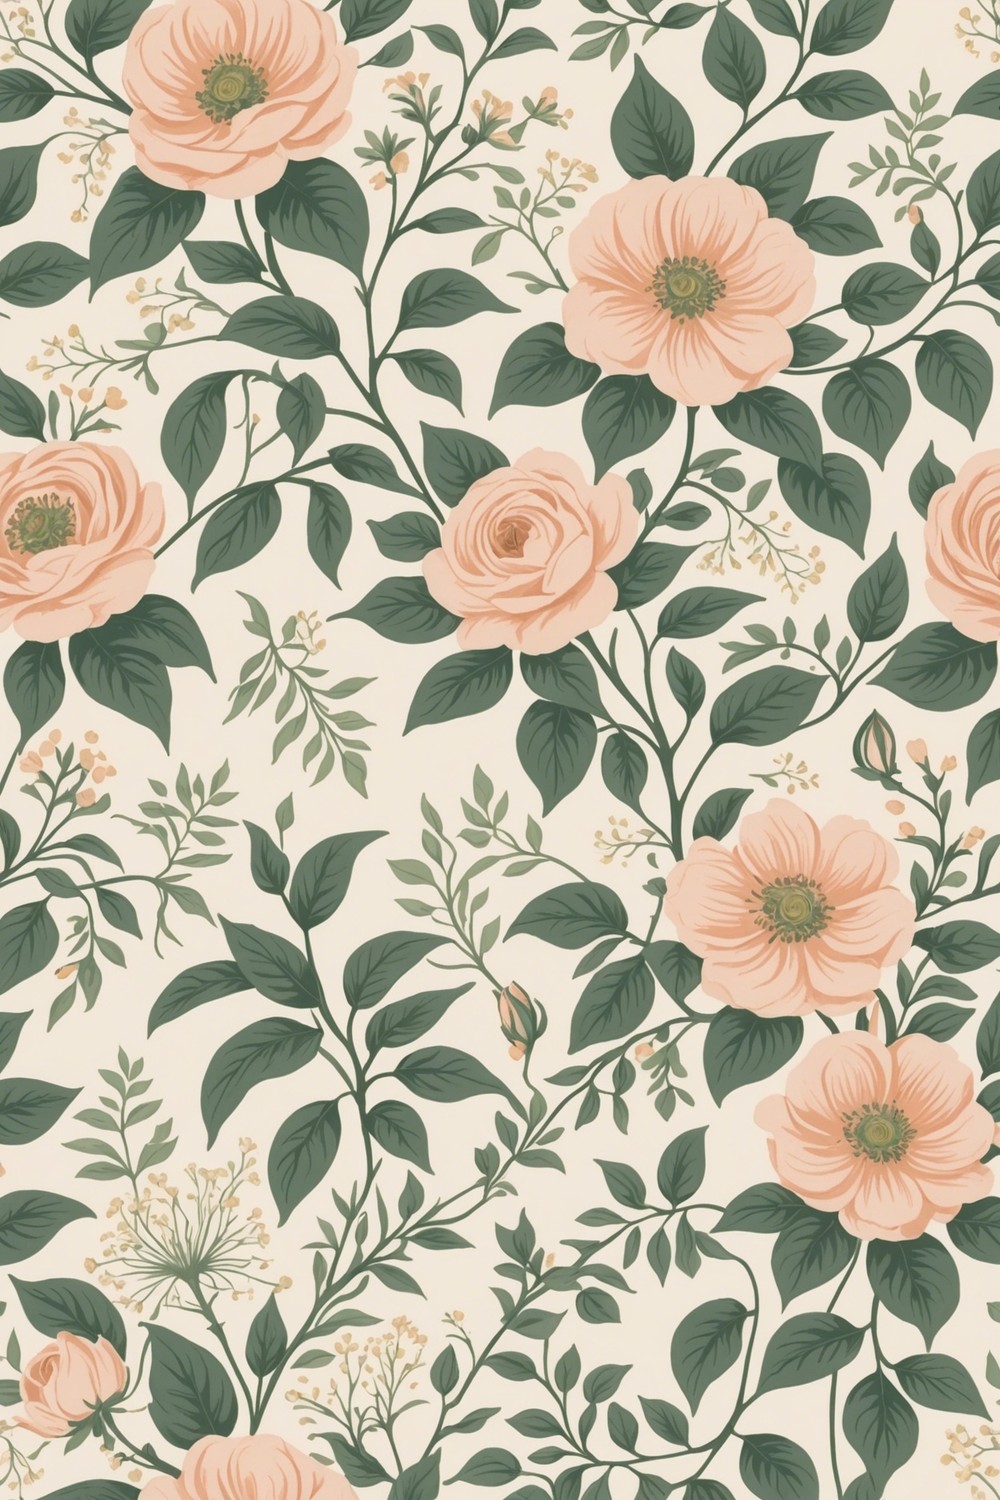 Blushing Blooms: Delicate Floral Patterns in Pastel Hues